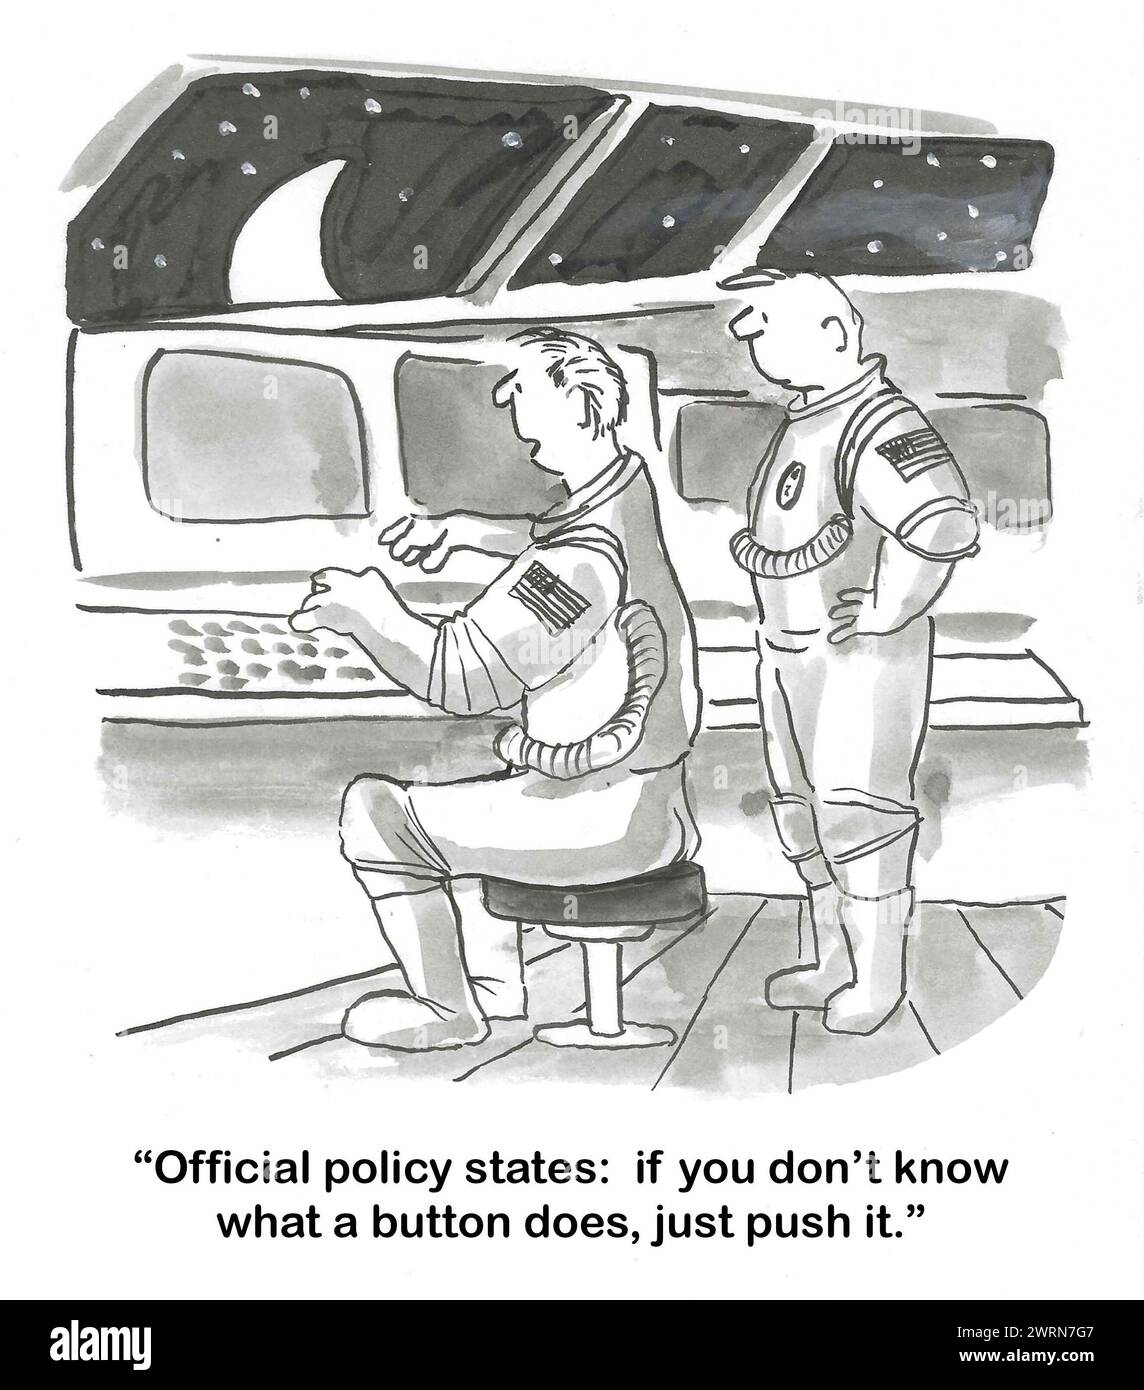 BW cartoon of two astronauts in a space capsule.  One says that office space policy is to go ahead and push the button, if you do not know what it doe Stock Photo